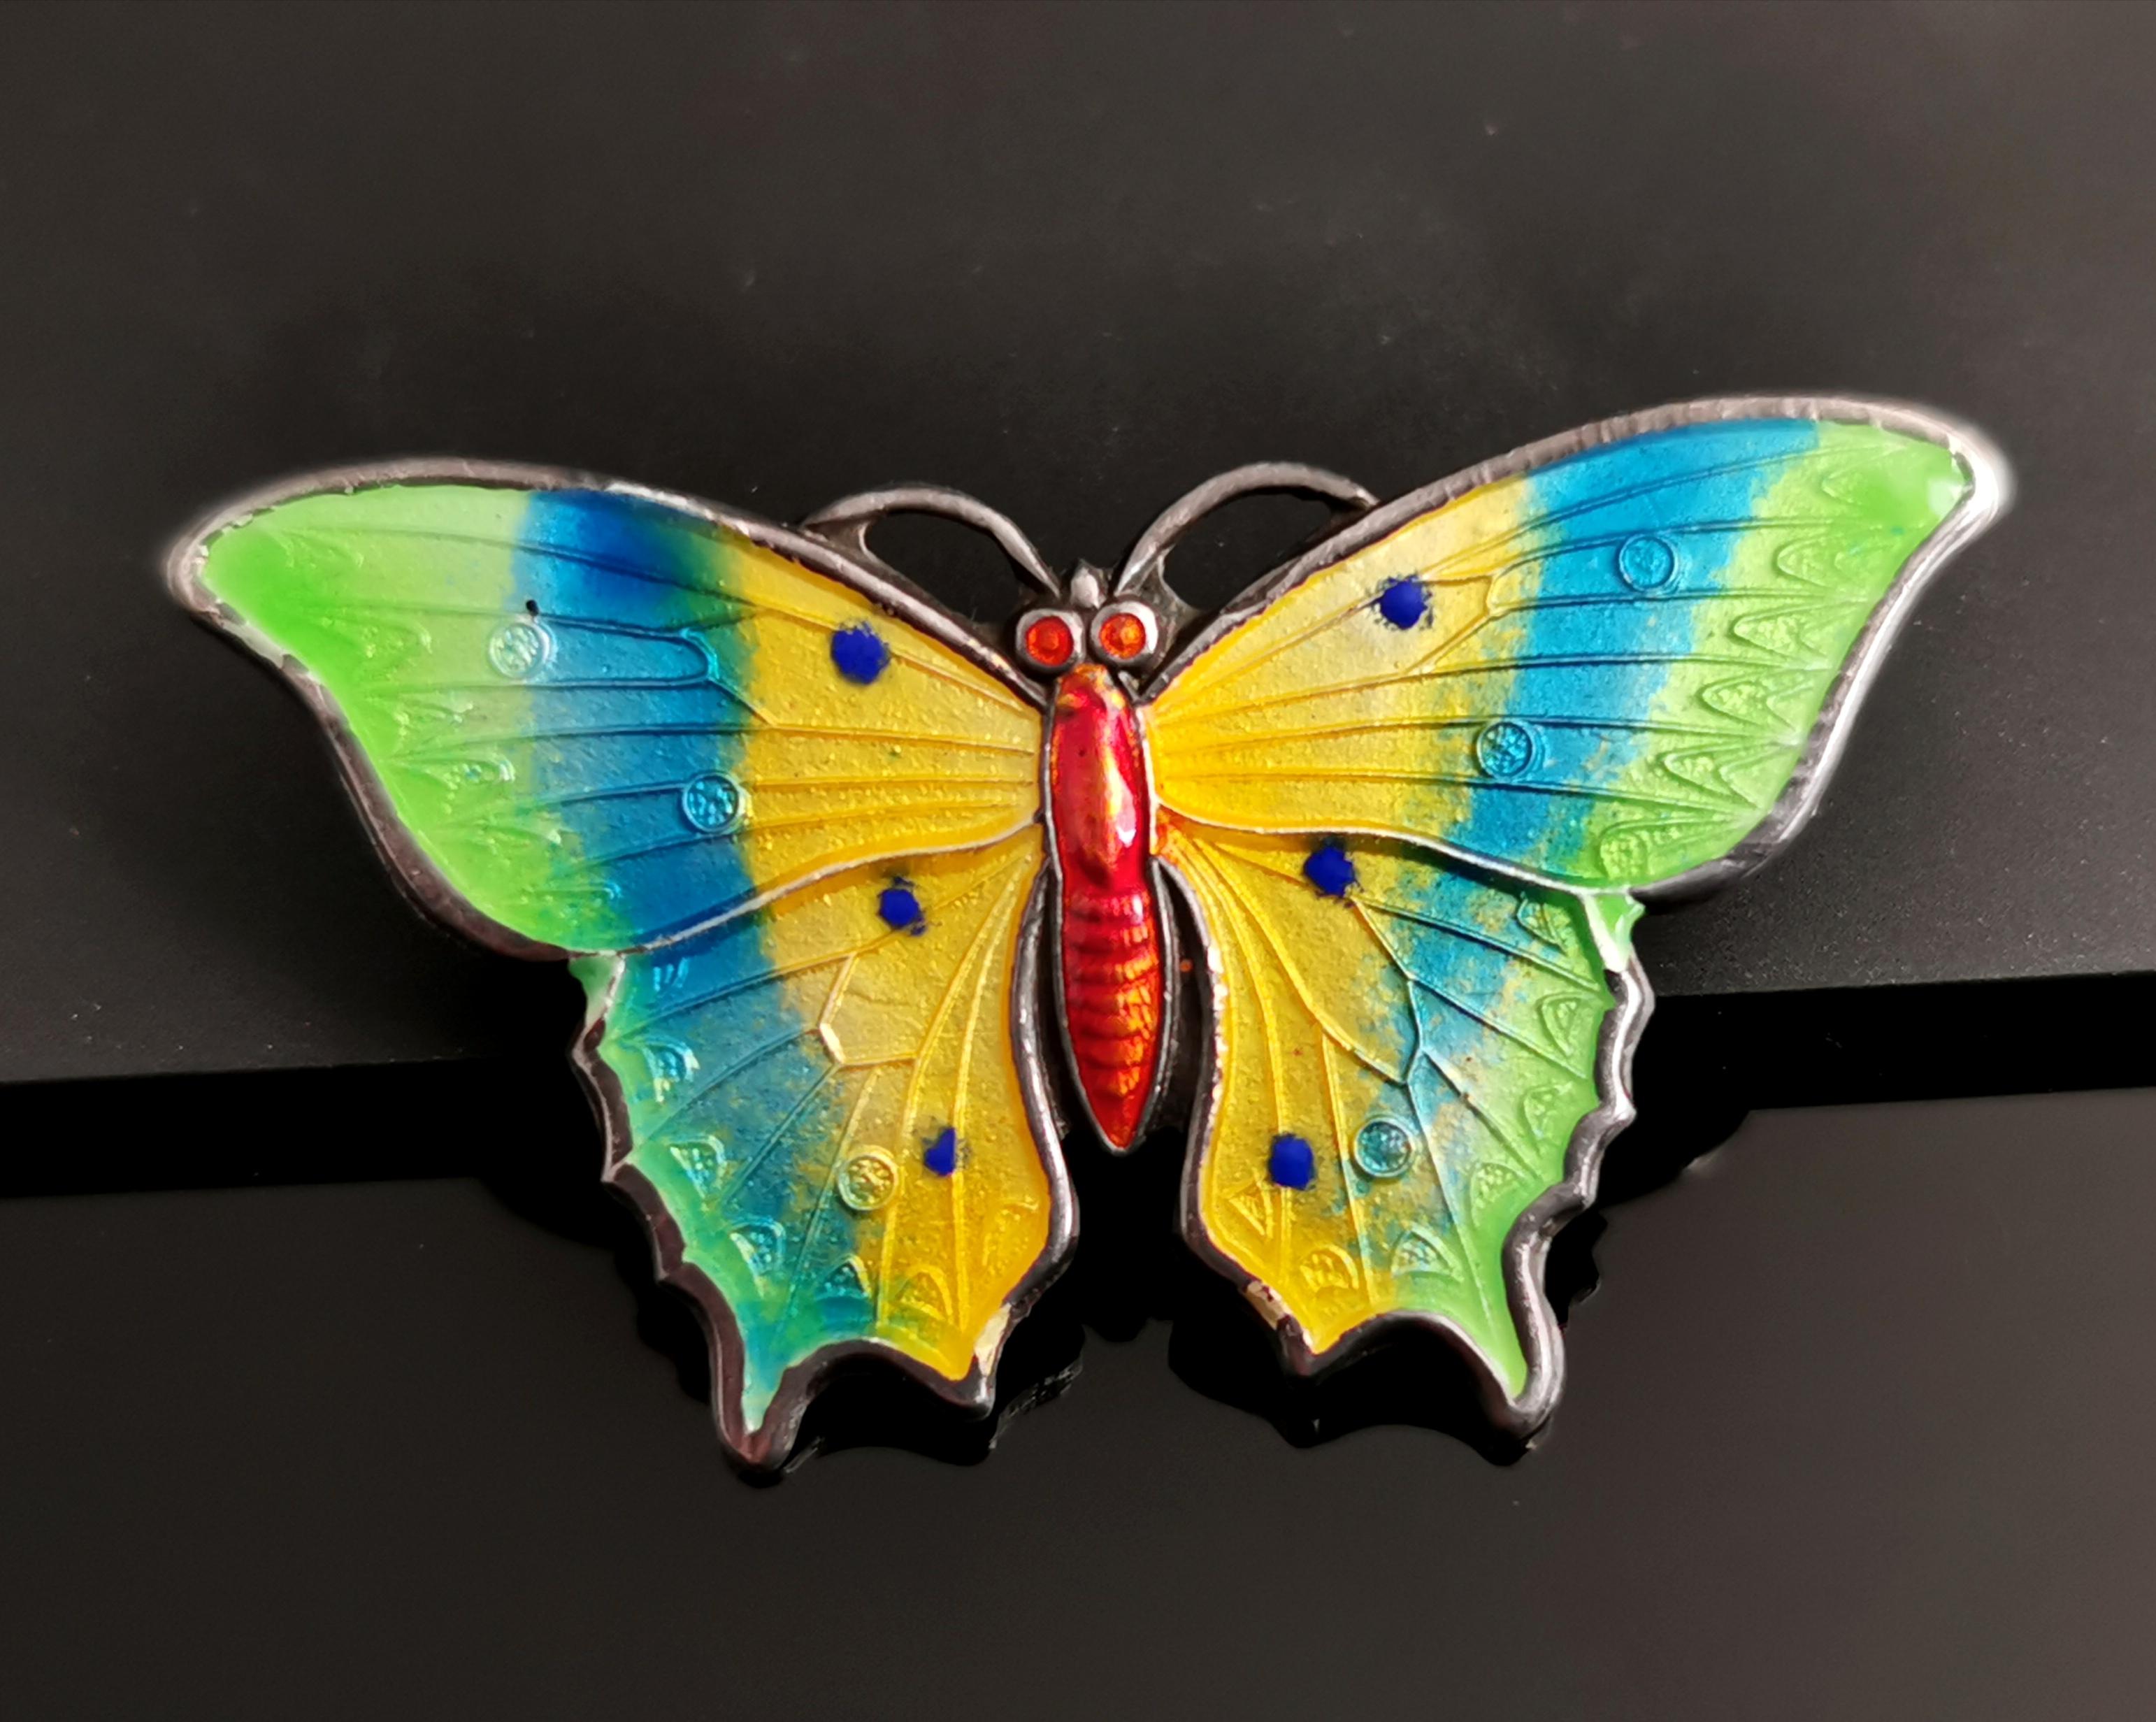 A beautiful and vibrant antique sterling silver and enamel butterfly brooch.

Crafted from solid sterling silver silver and enamelled with bright and vibrant colours of green, yellow and blue with a coral coloured body.

It has an old C type clasp